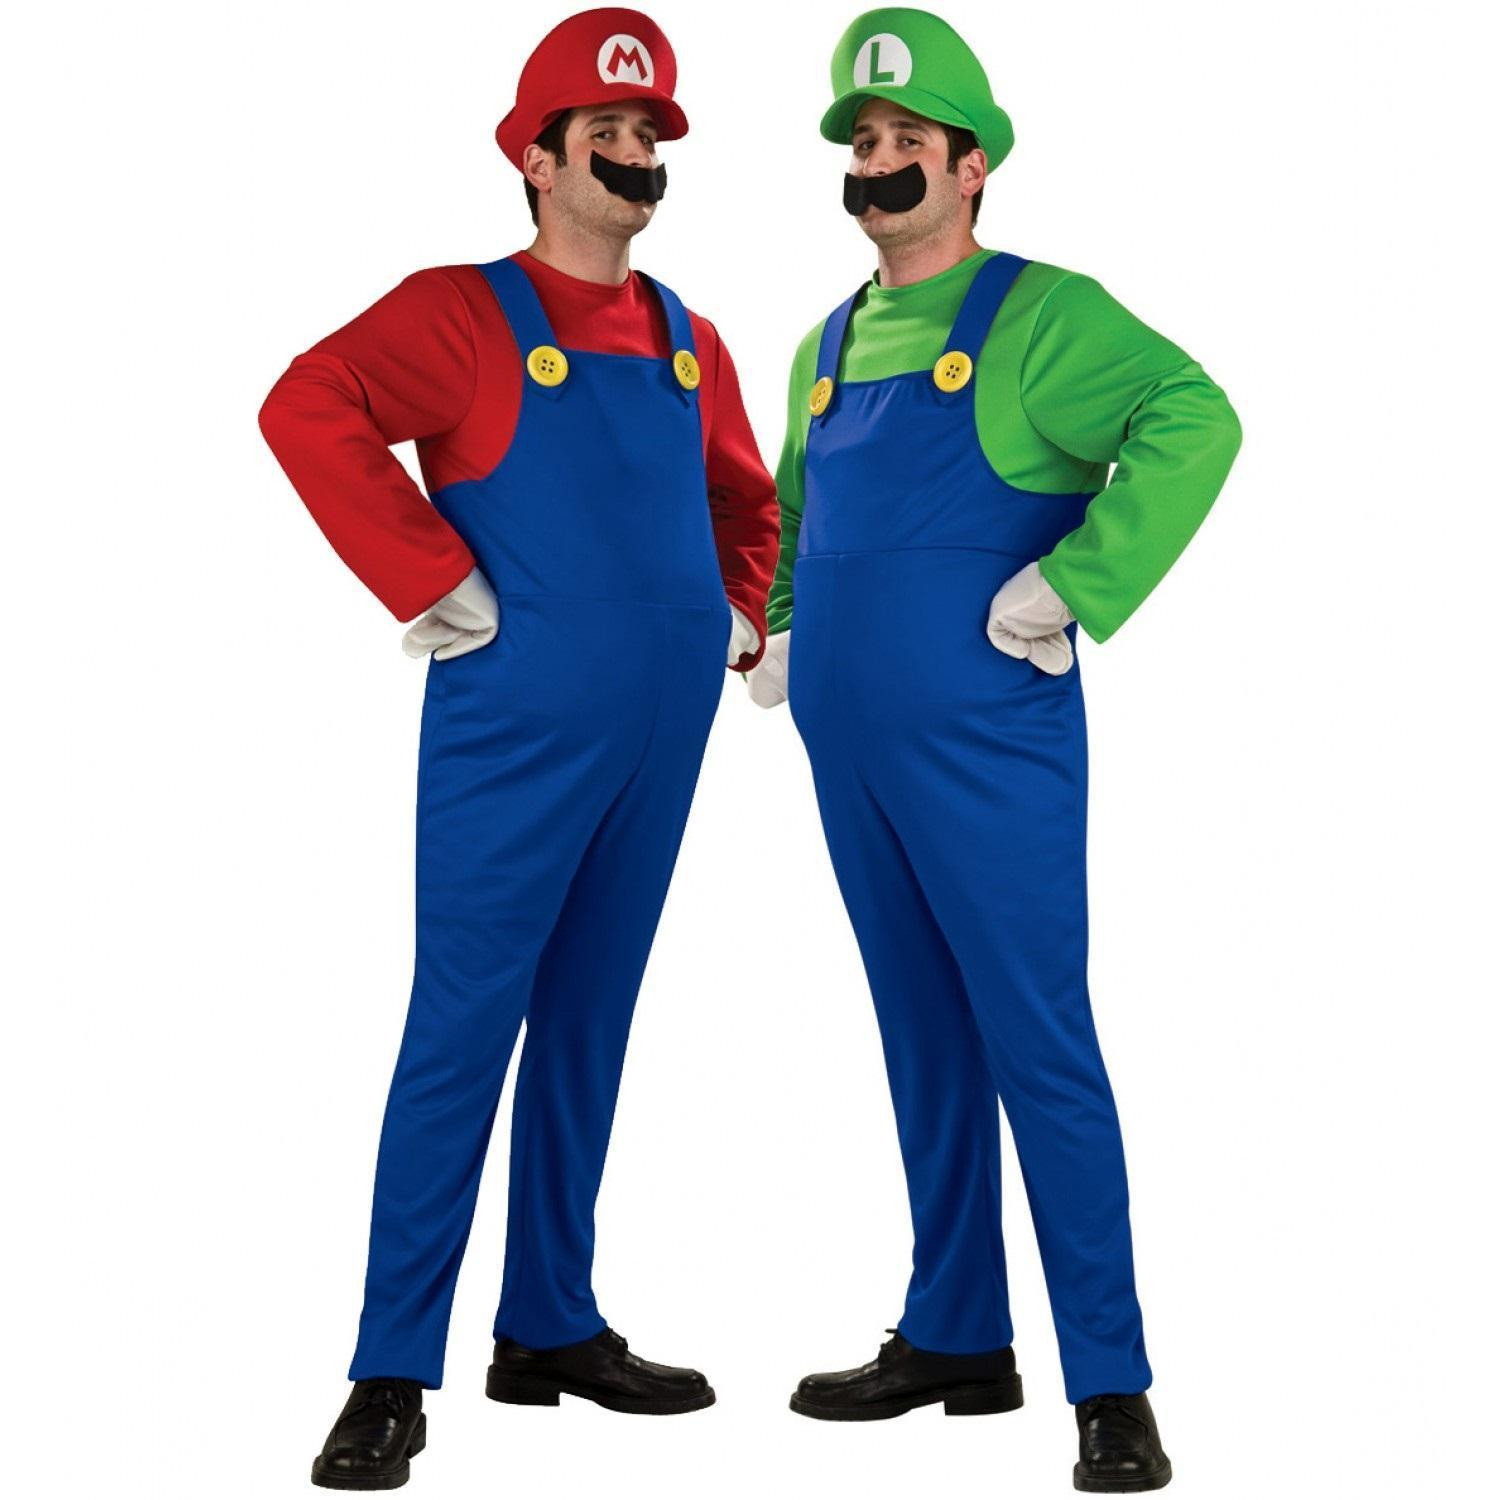 DIY Mario Costumes
 How To Make a DIY Mario Costume 5 steps with images